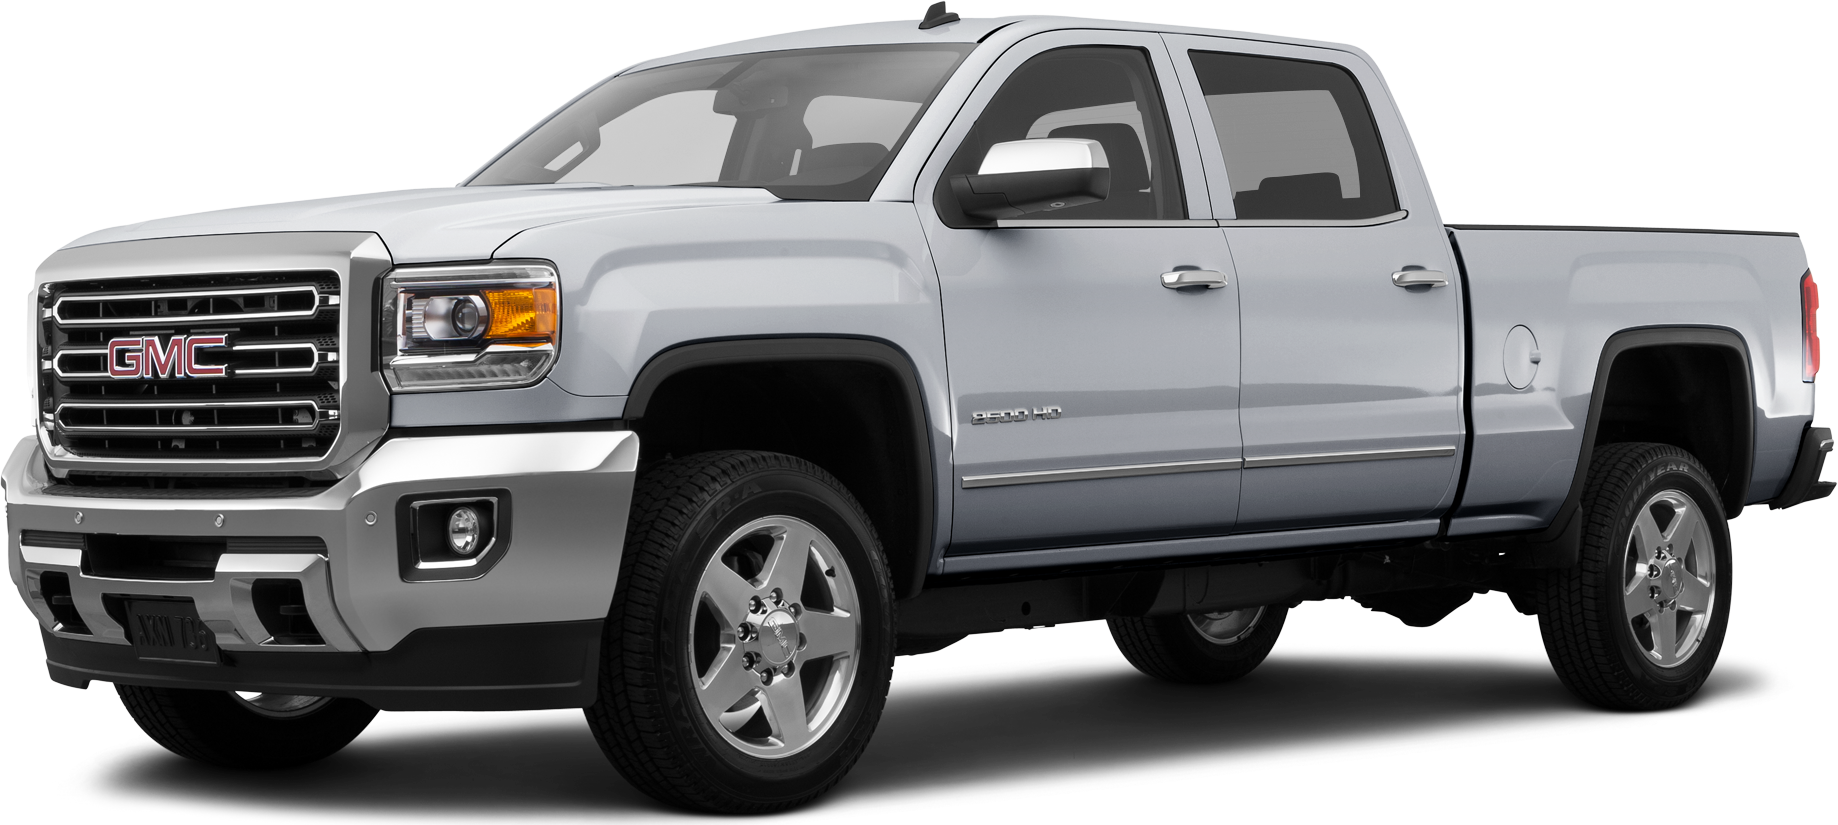 2015 GMC Sierra 3500 HD Crew Cab Specs and Features | Kelley Blue Book